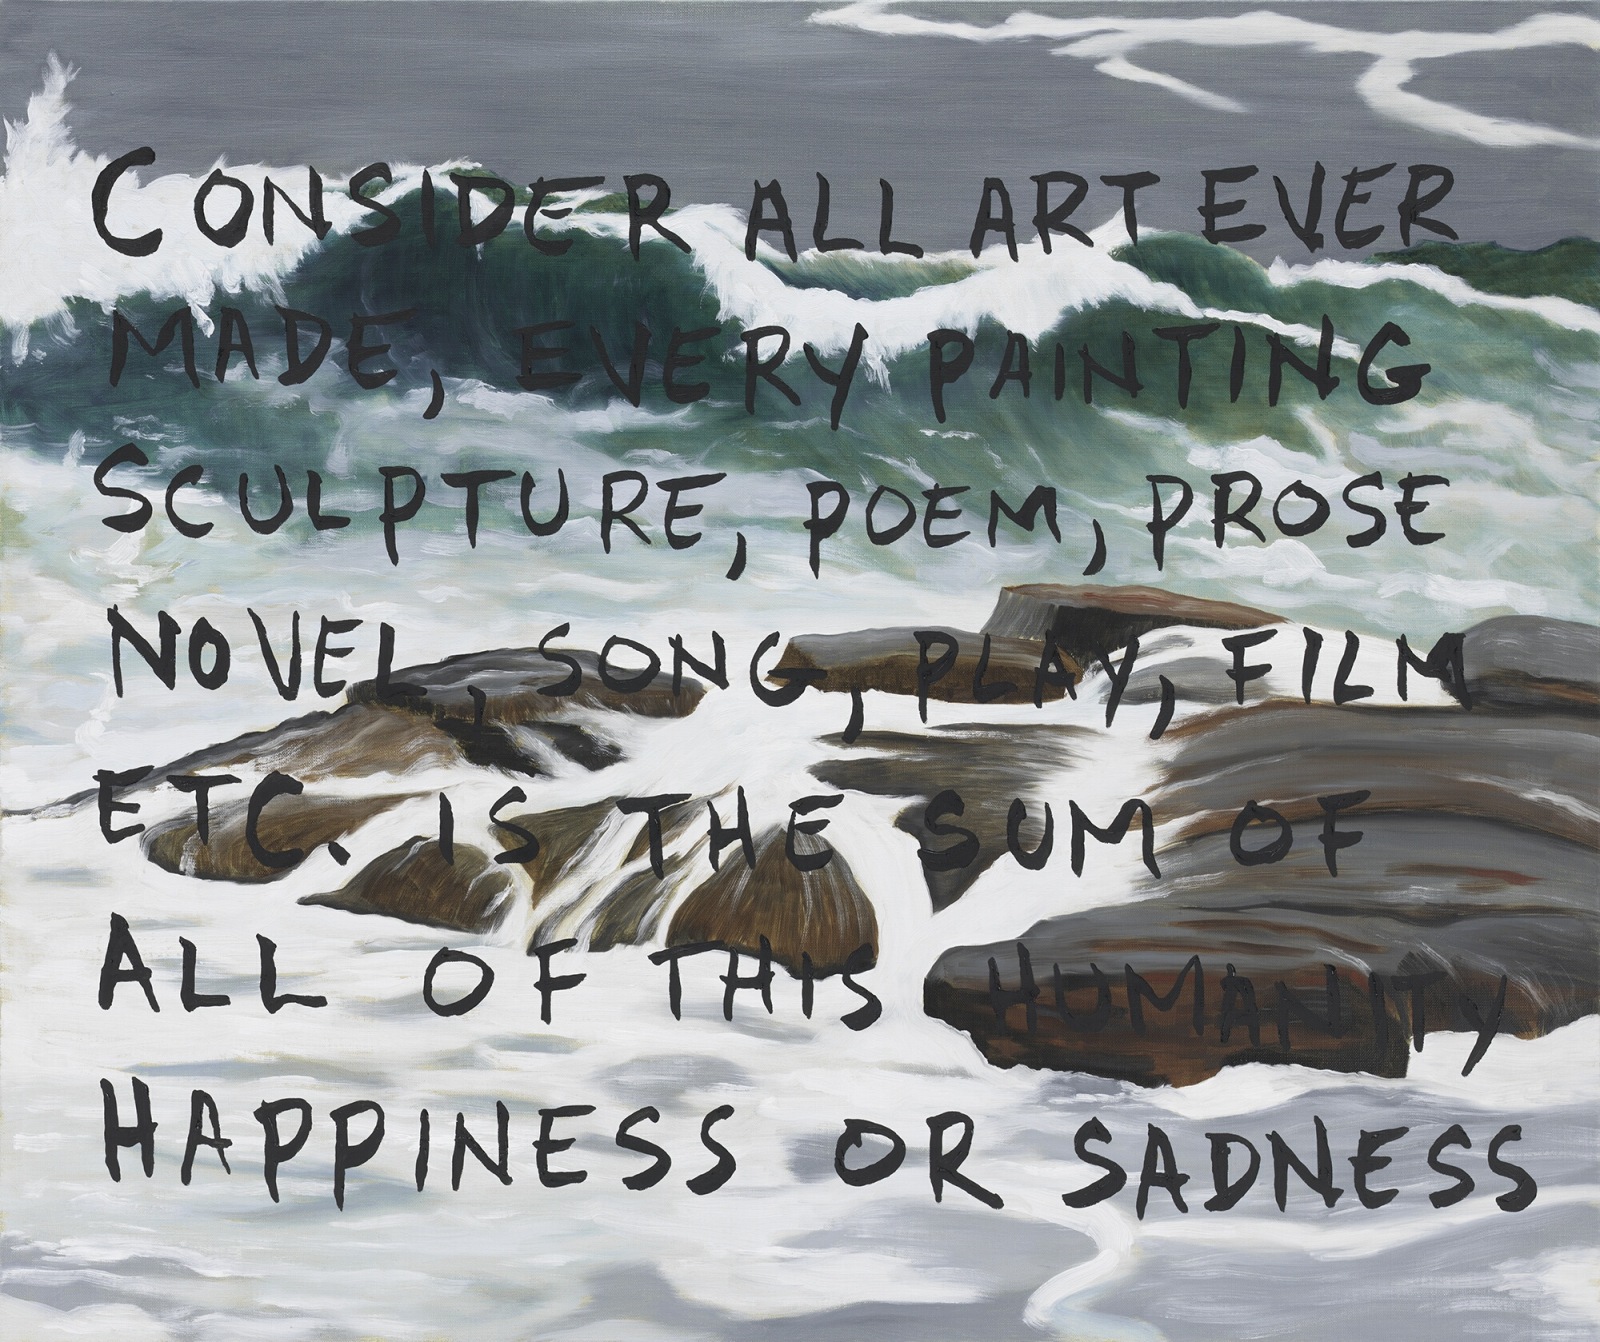 Painting of the ocean with the following text painted over the image in black: Consider all art ever made, every painting, sculpture, poem, prose, novel, song, play, film, etc, is the sum of all of this humanity happiness or sadness.